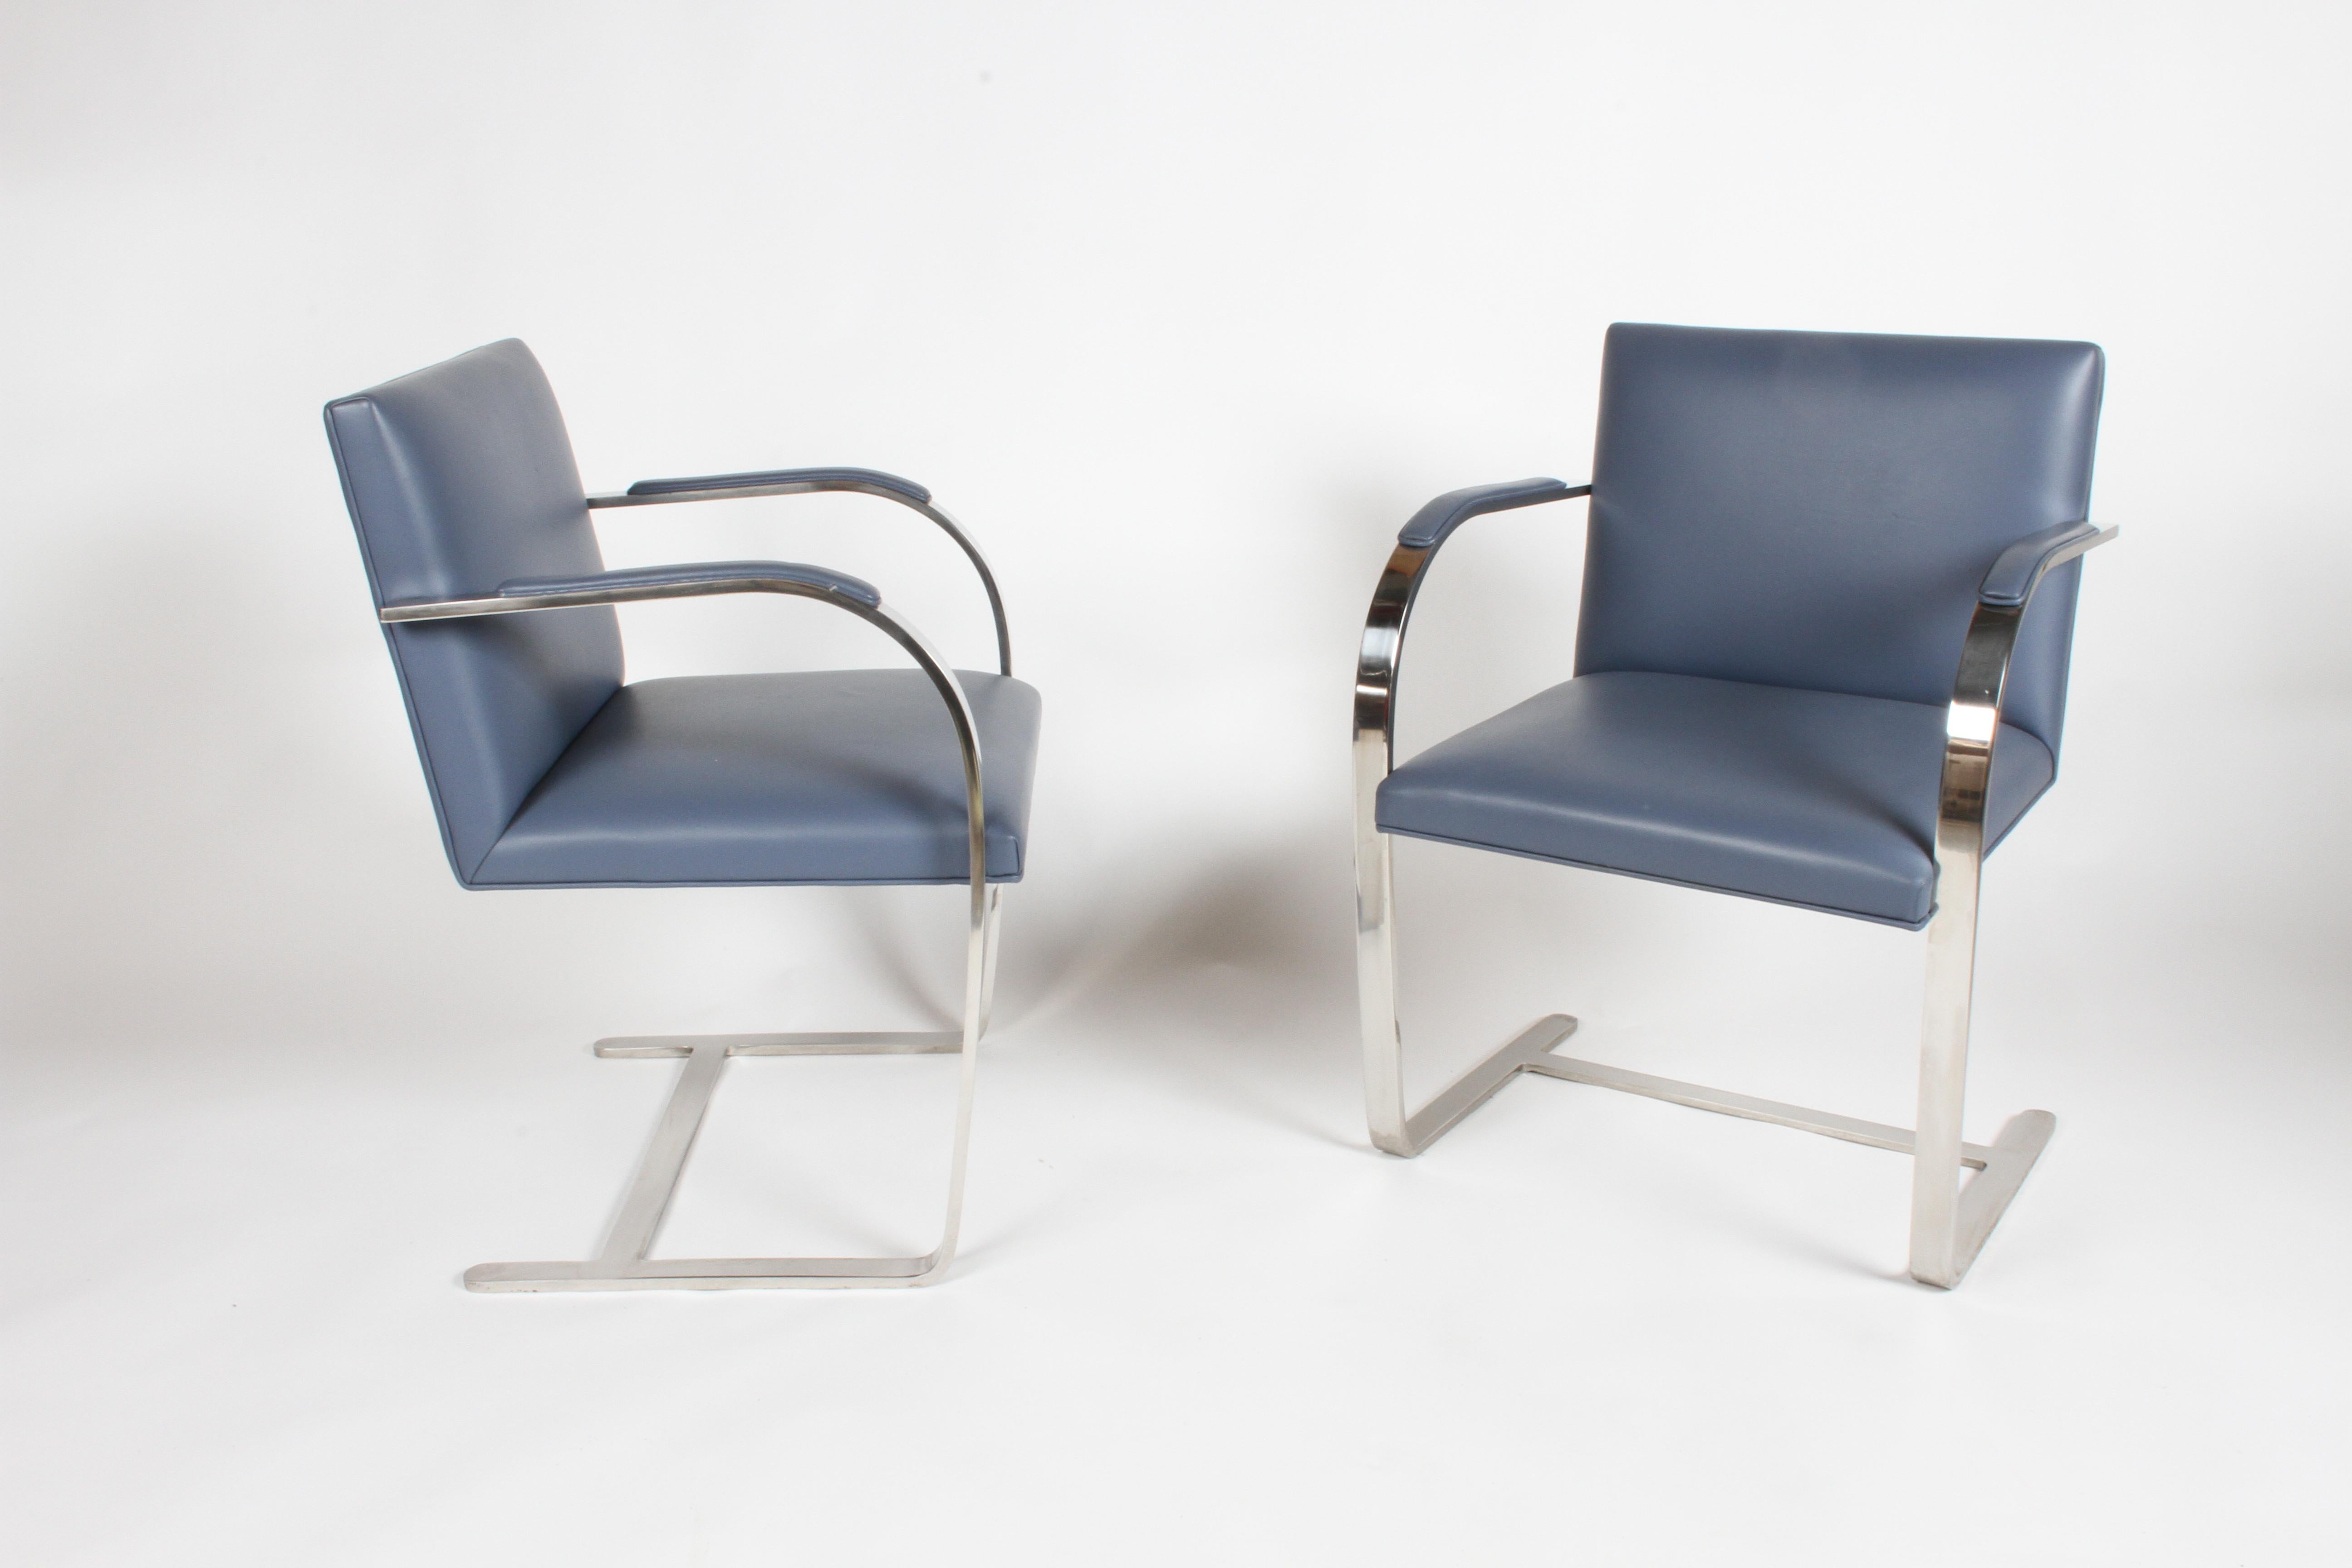 Mid-Century Modern Pair of Mies van der Rohe Flatbar Brno Chairs by Knoll, Stainless